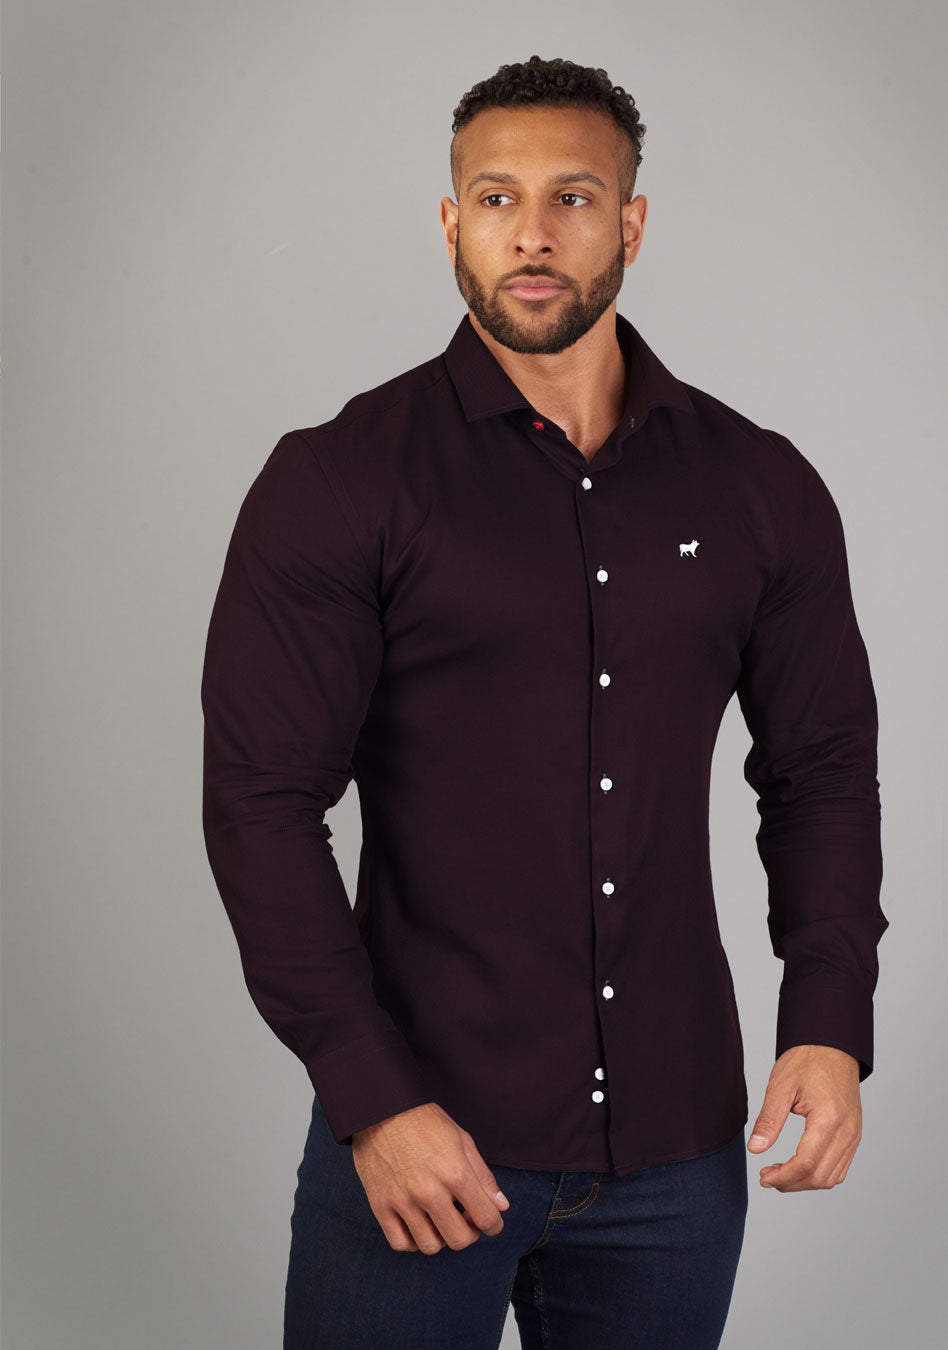 Purple muscle fit shirt on an athletically built model, showcasing the athletic fit design that enhances physique, with stretch fabric for comfort and mobility